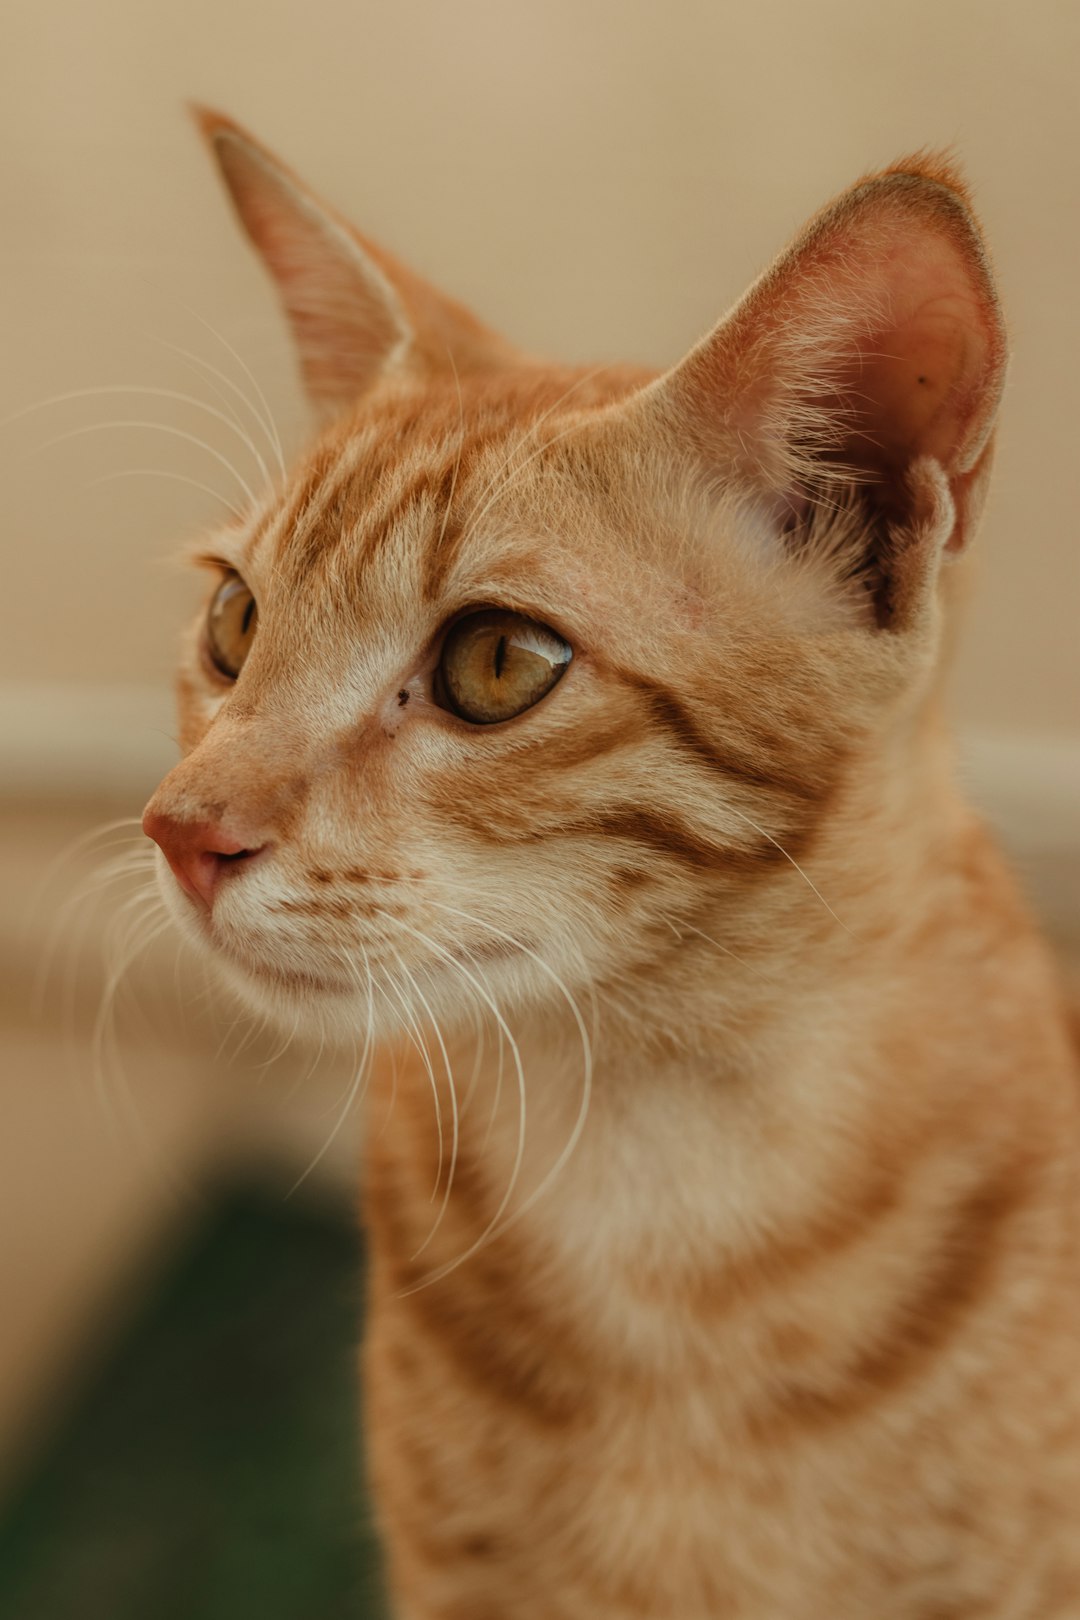 orange tabby cat in close up photography